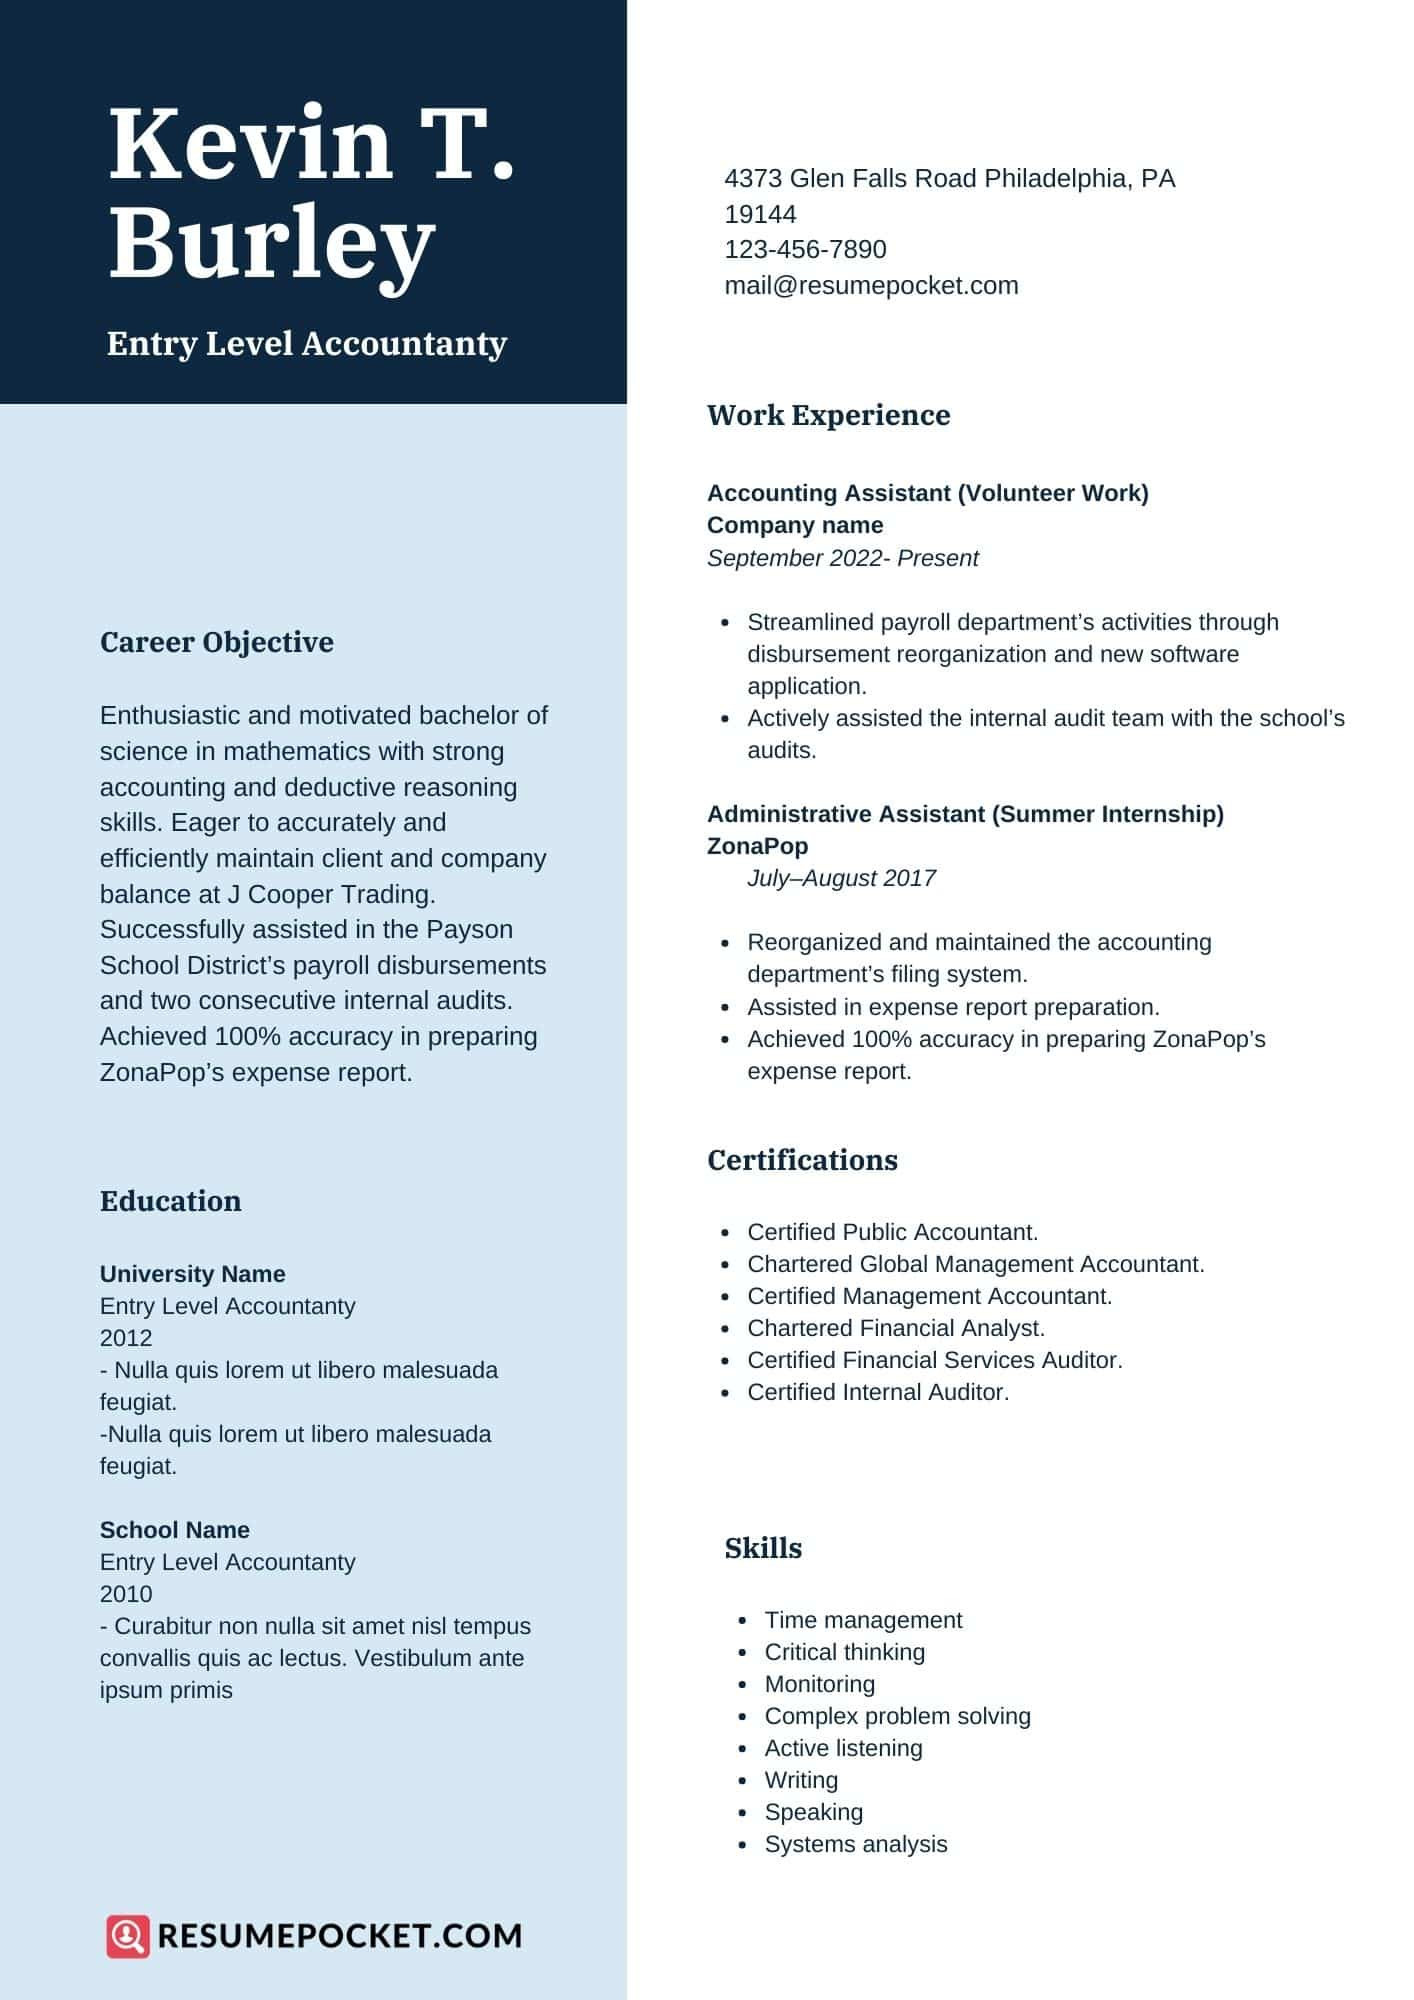 Entry Level Staff Accountant Resume Sample Entry Level Accountant Resume Samples – Resumepocket